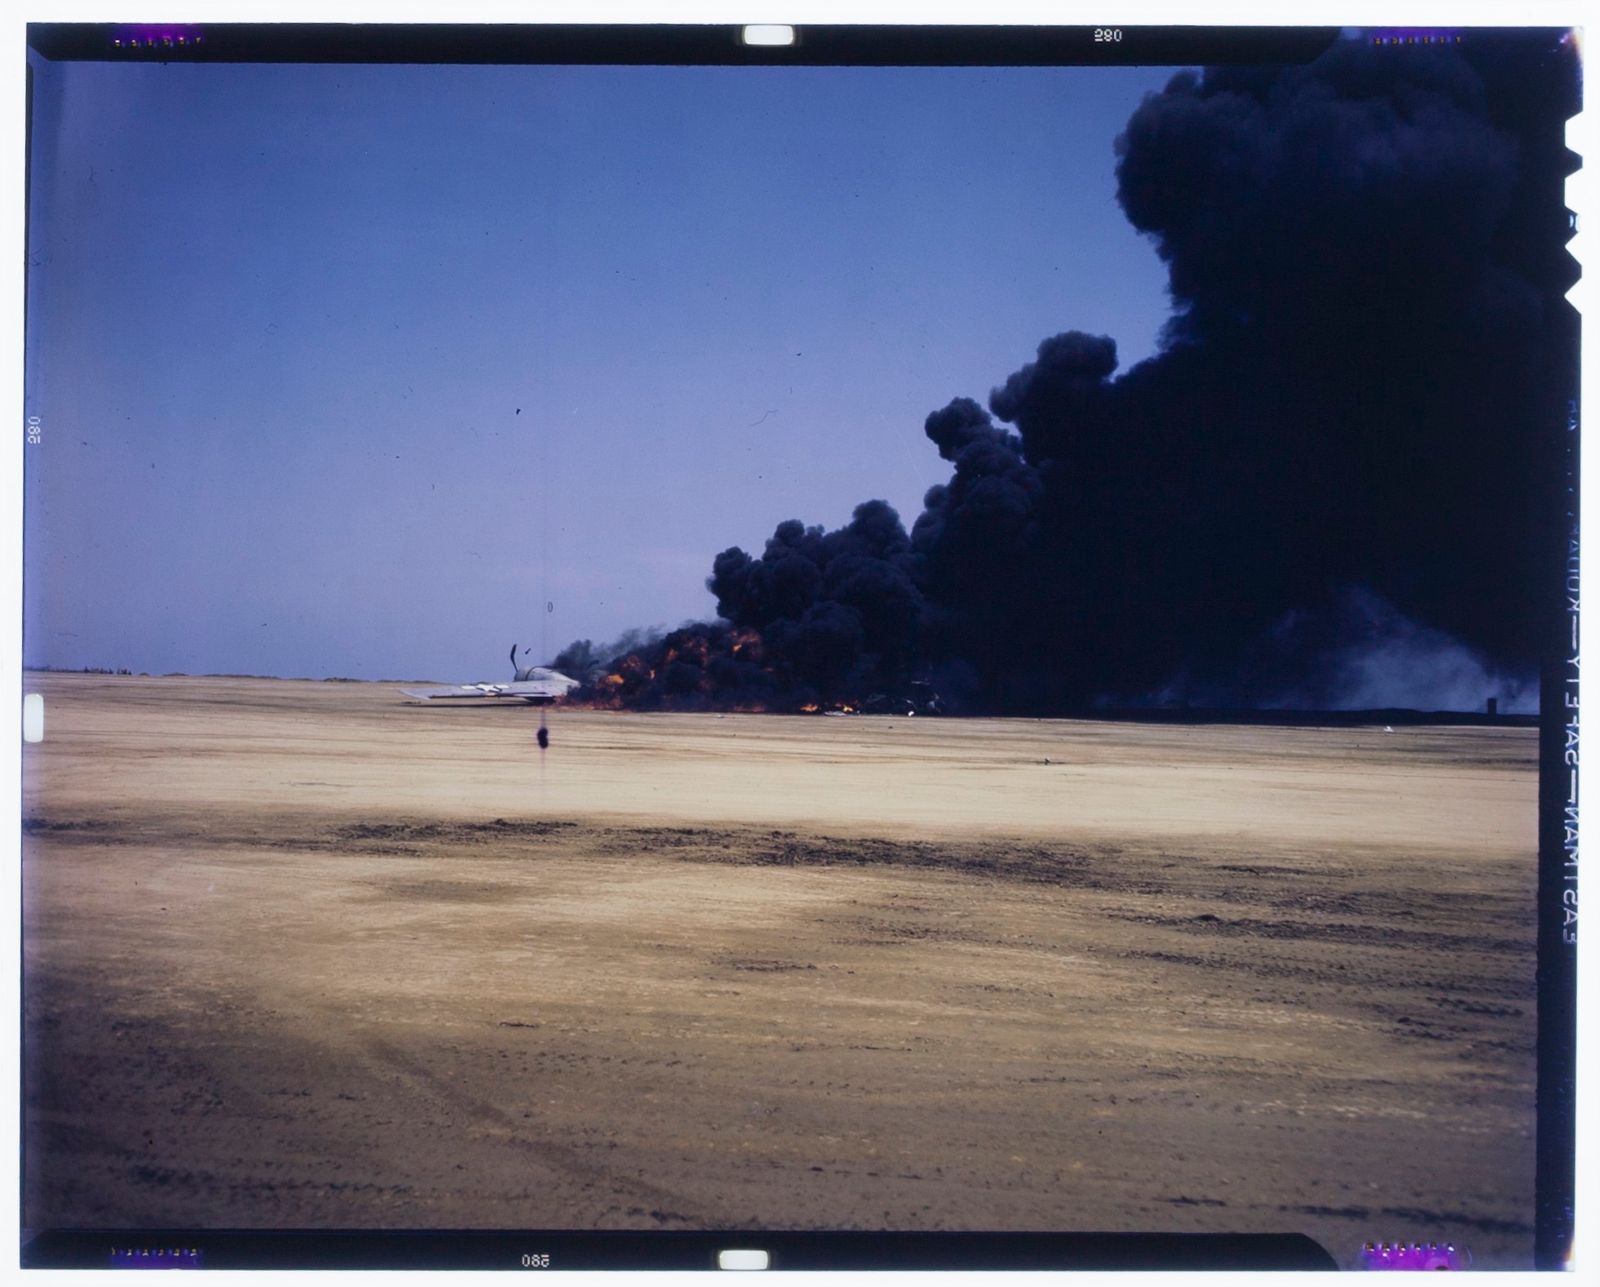 © Marianne Ingleby - A US fighter plane explodes, presumably Iwo Jima in spring of 1945.